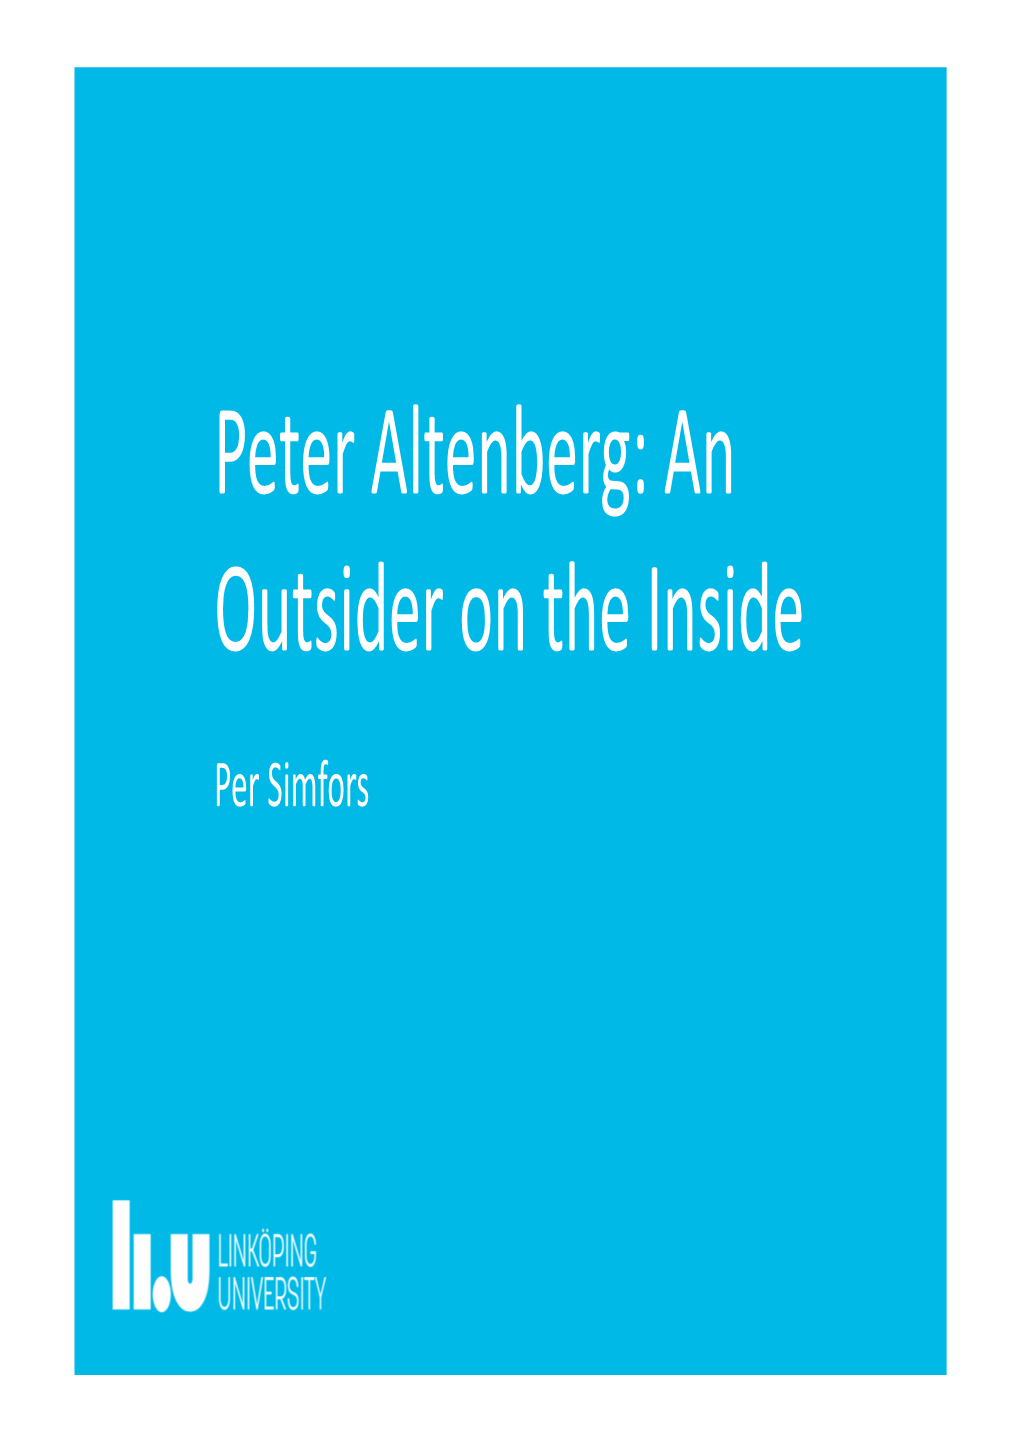 Peter Altenberg: an Outsider on the Inside